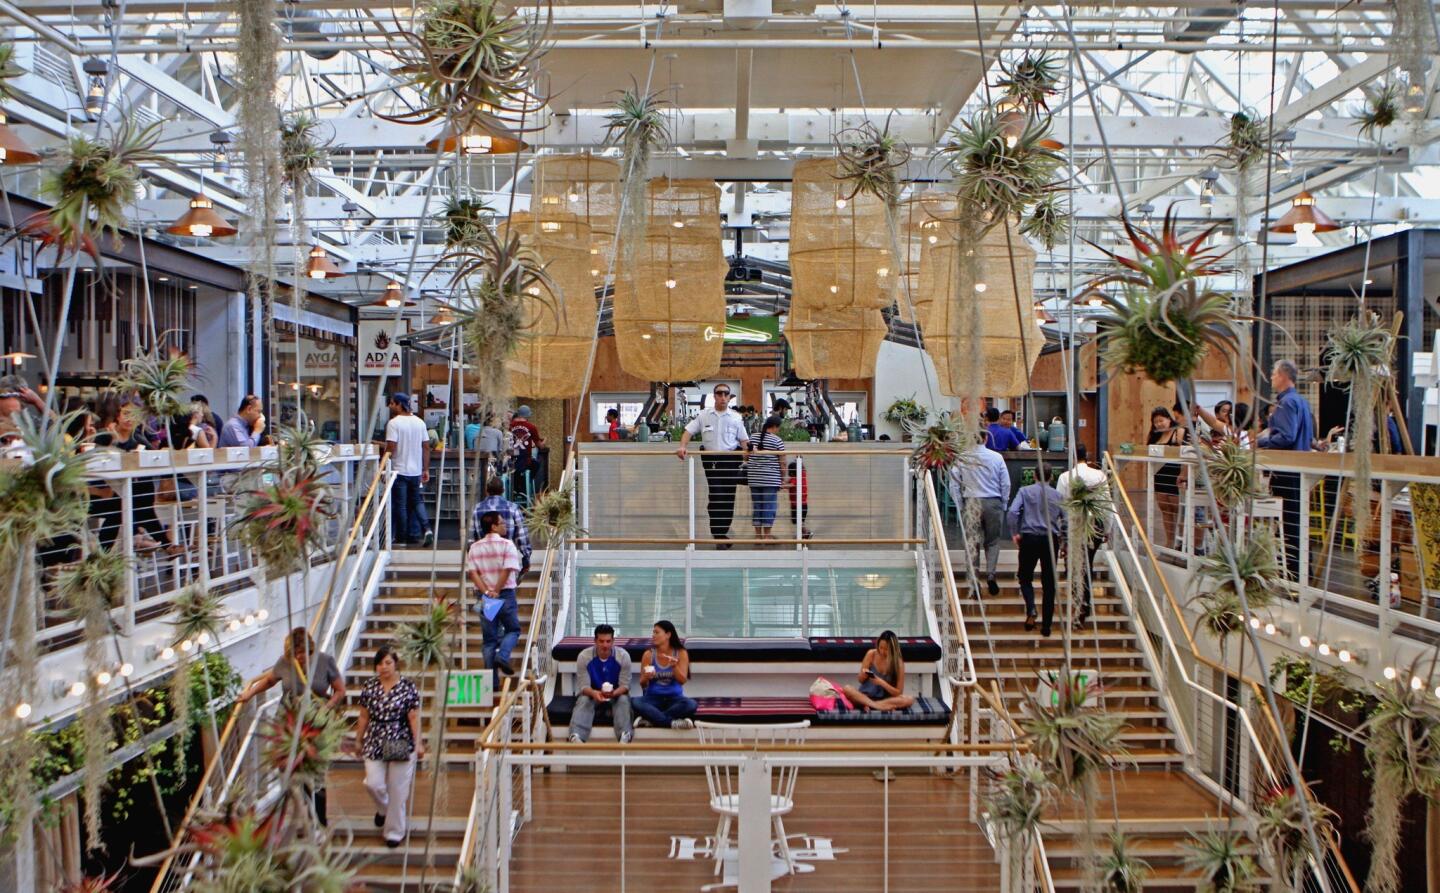 Anaheim Packing House is the two-story food hall of the new Anaheim Packing District.